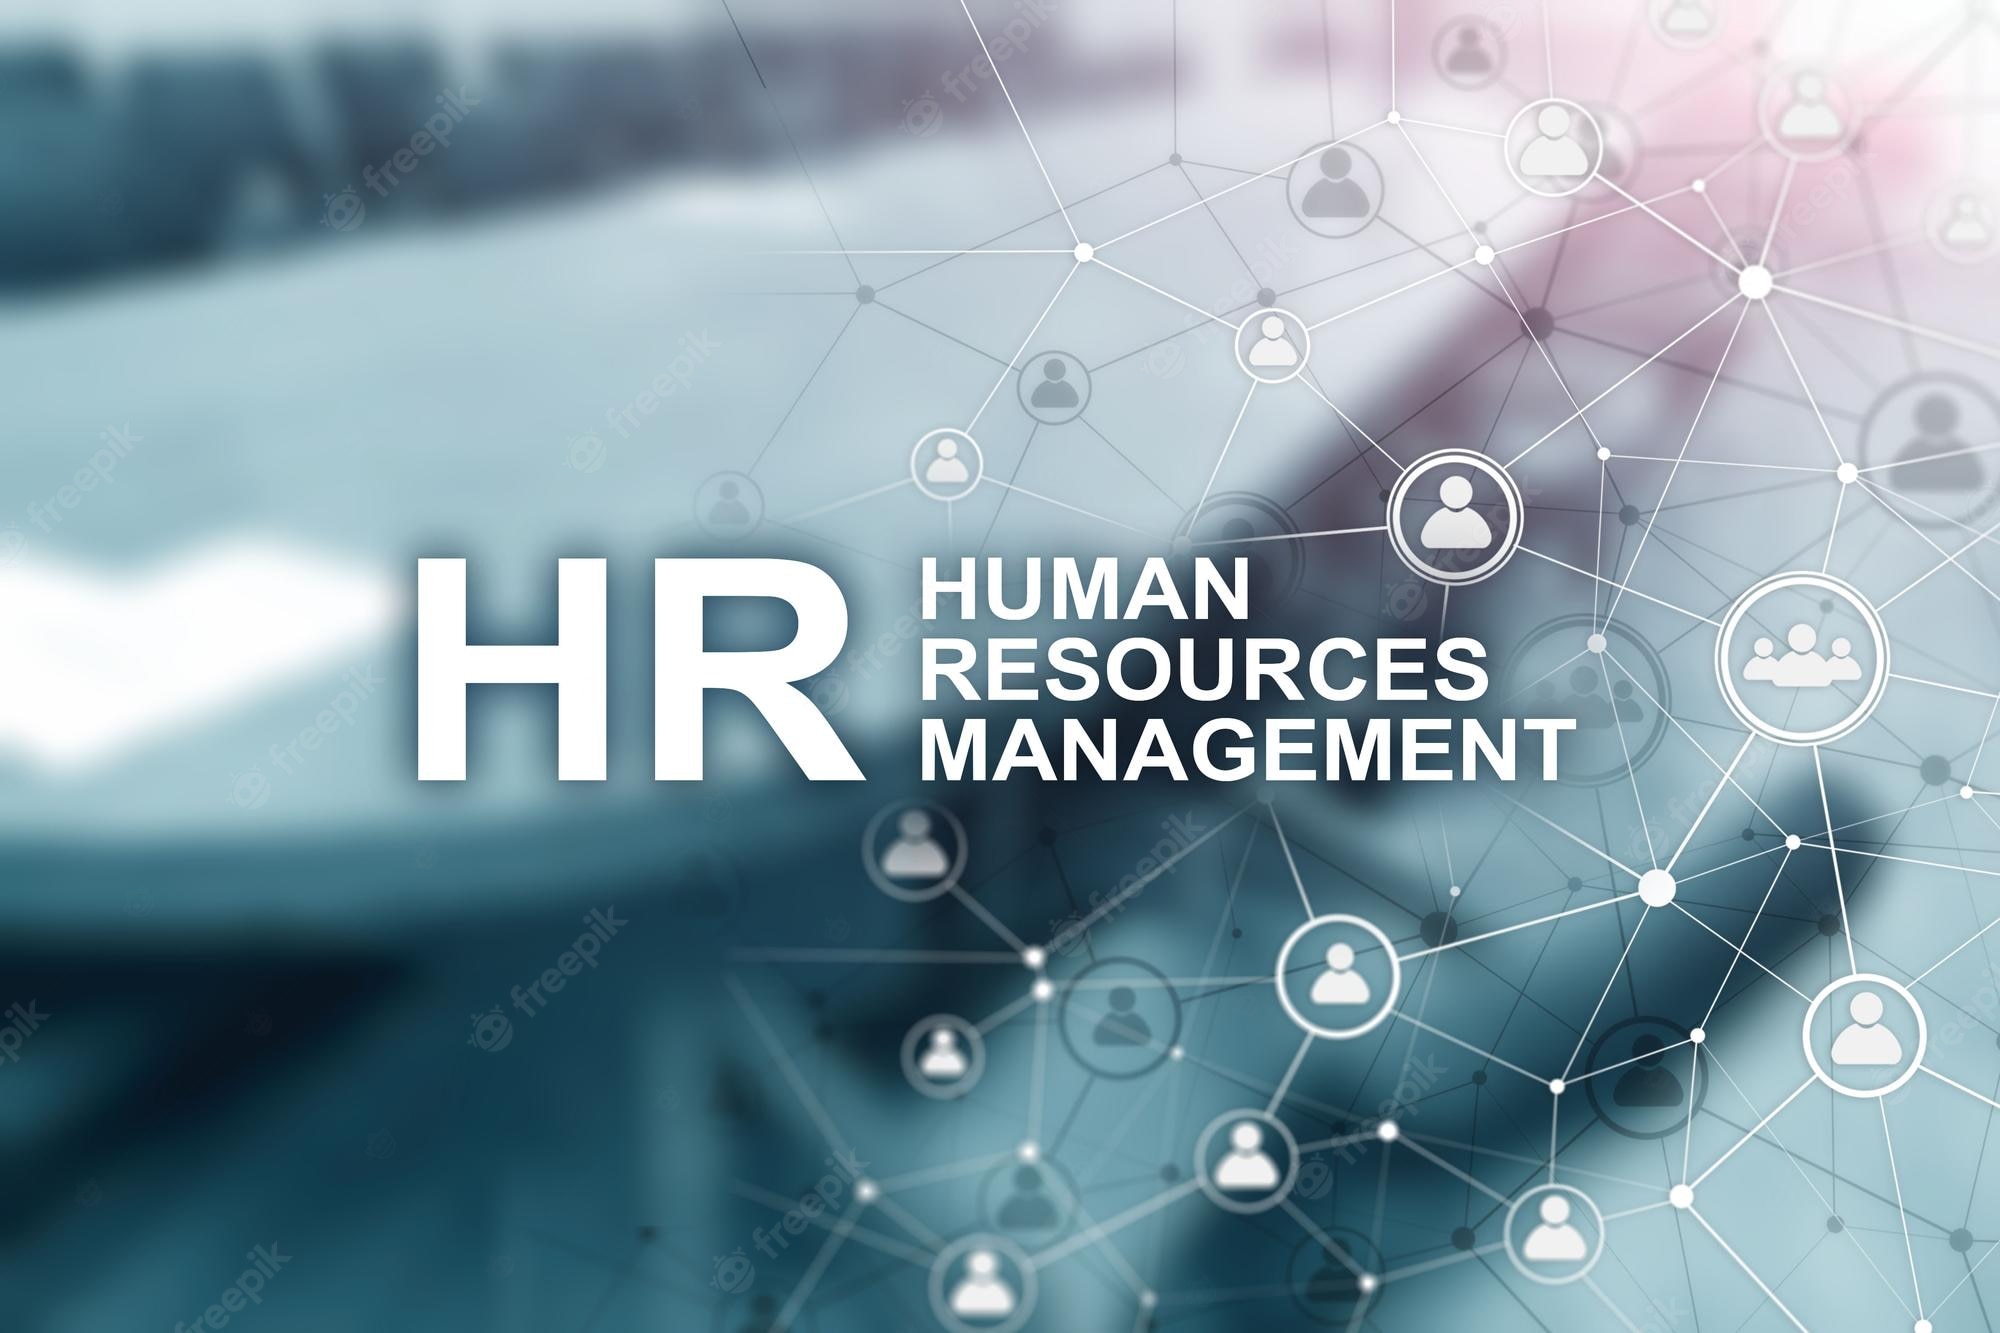 Human Resources Wallpapers